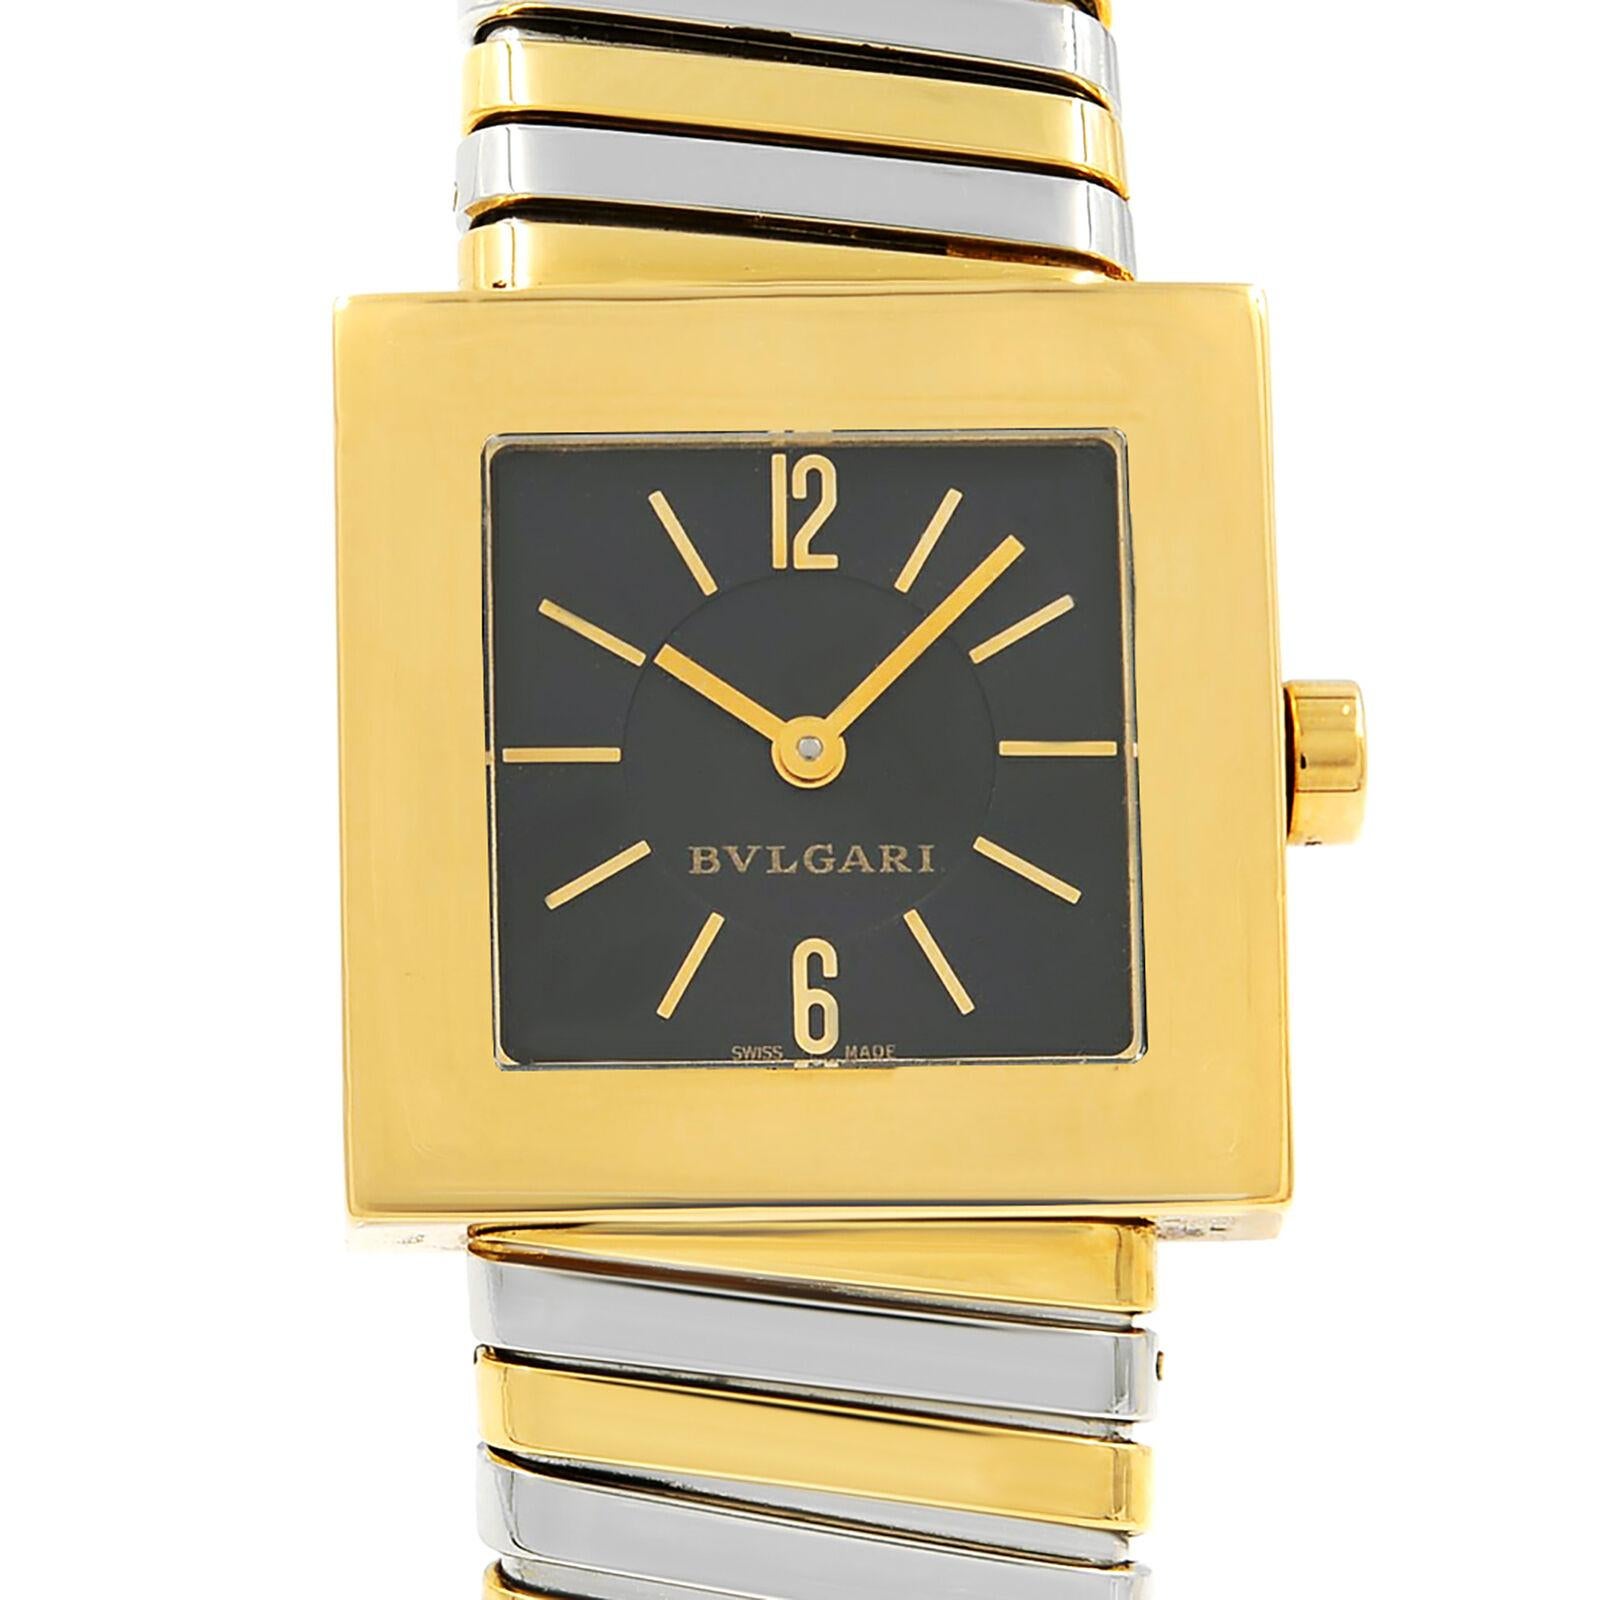 This pre-owned Bvlgari Tubogas SQ 22 2T is a beautiful Ladies timepiece that is powered by a quartz movement which is cased in a yellow gold case. It has a square shape face, no features dial and has hand sticks & numerals style markers. It is